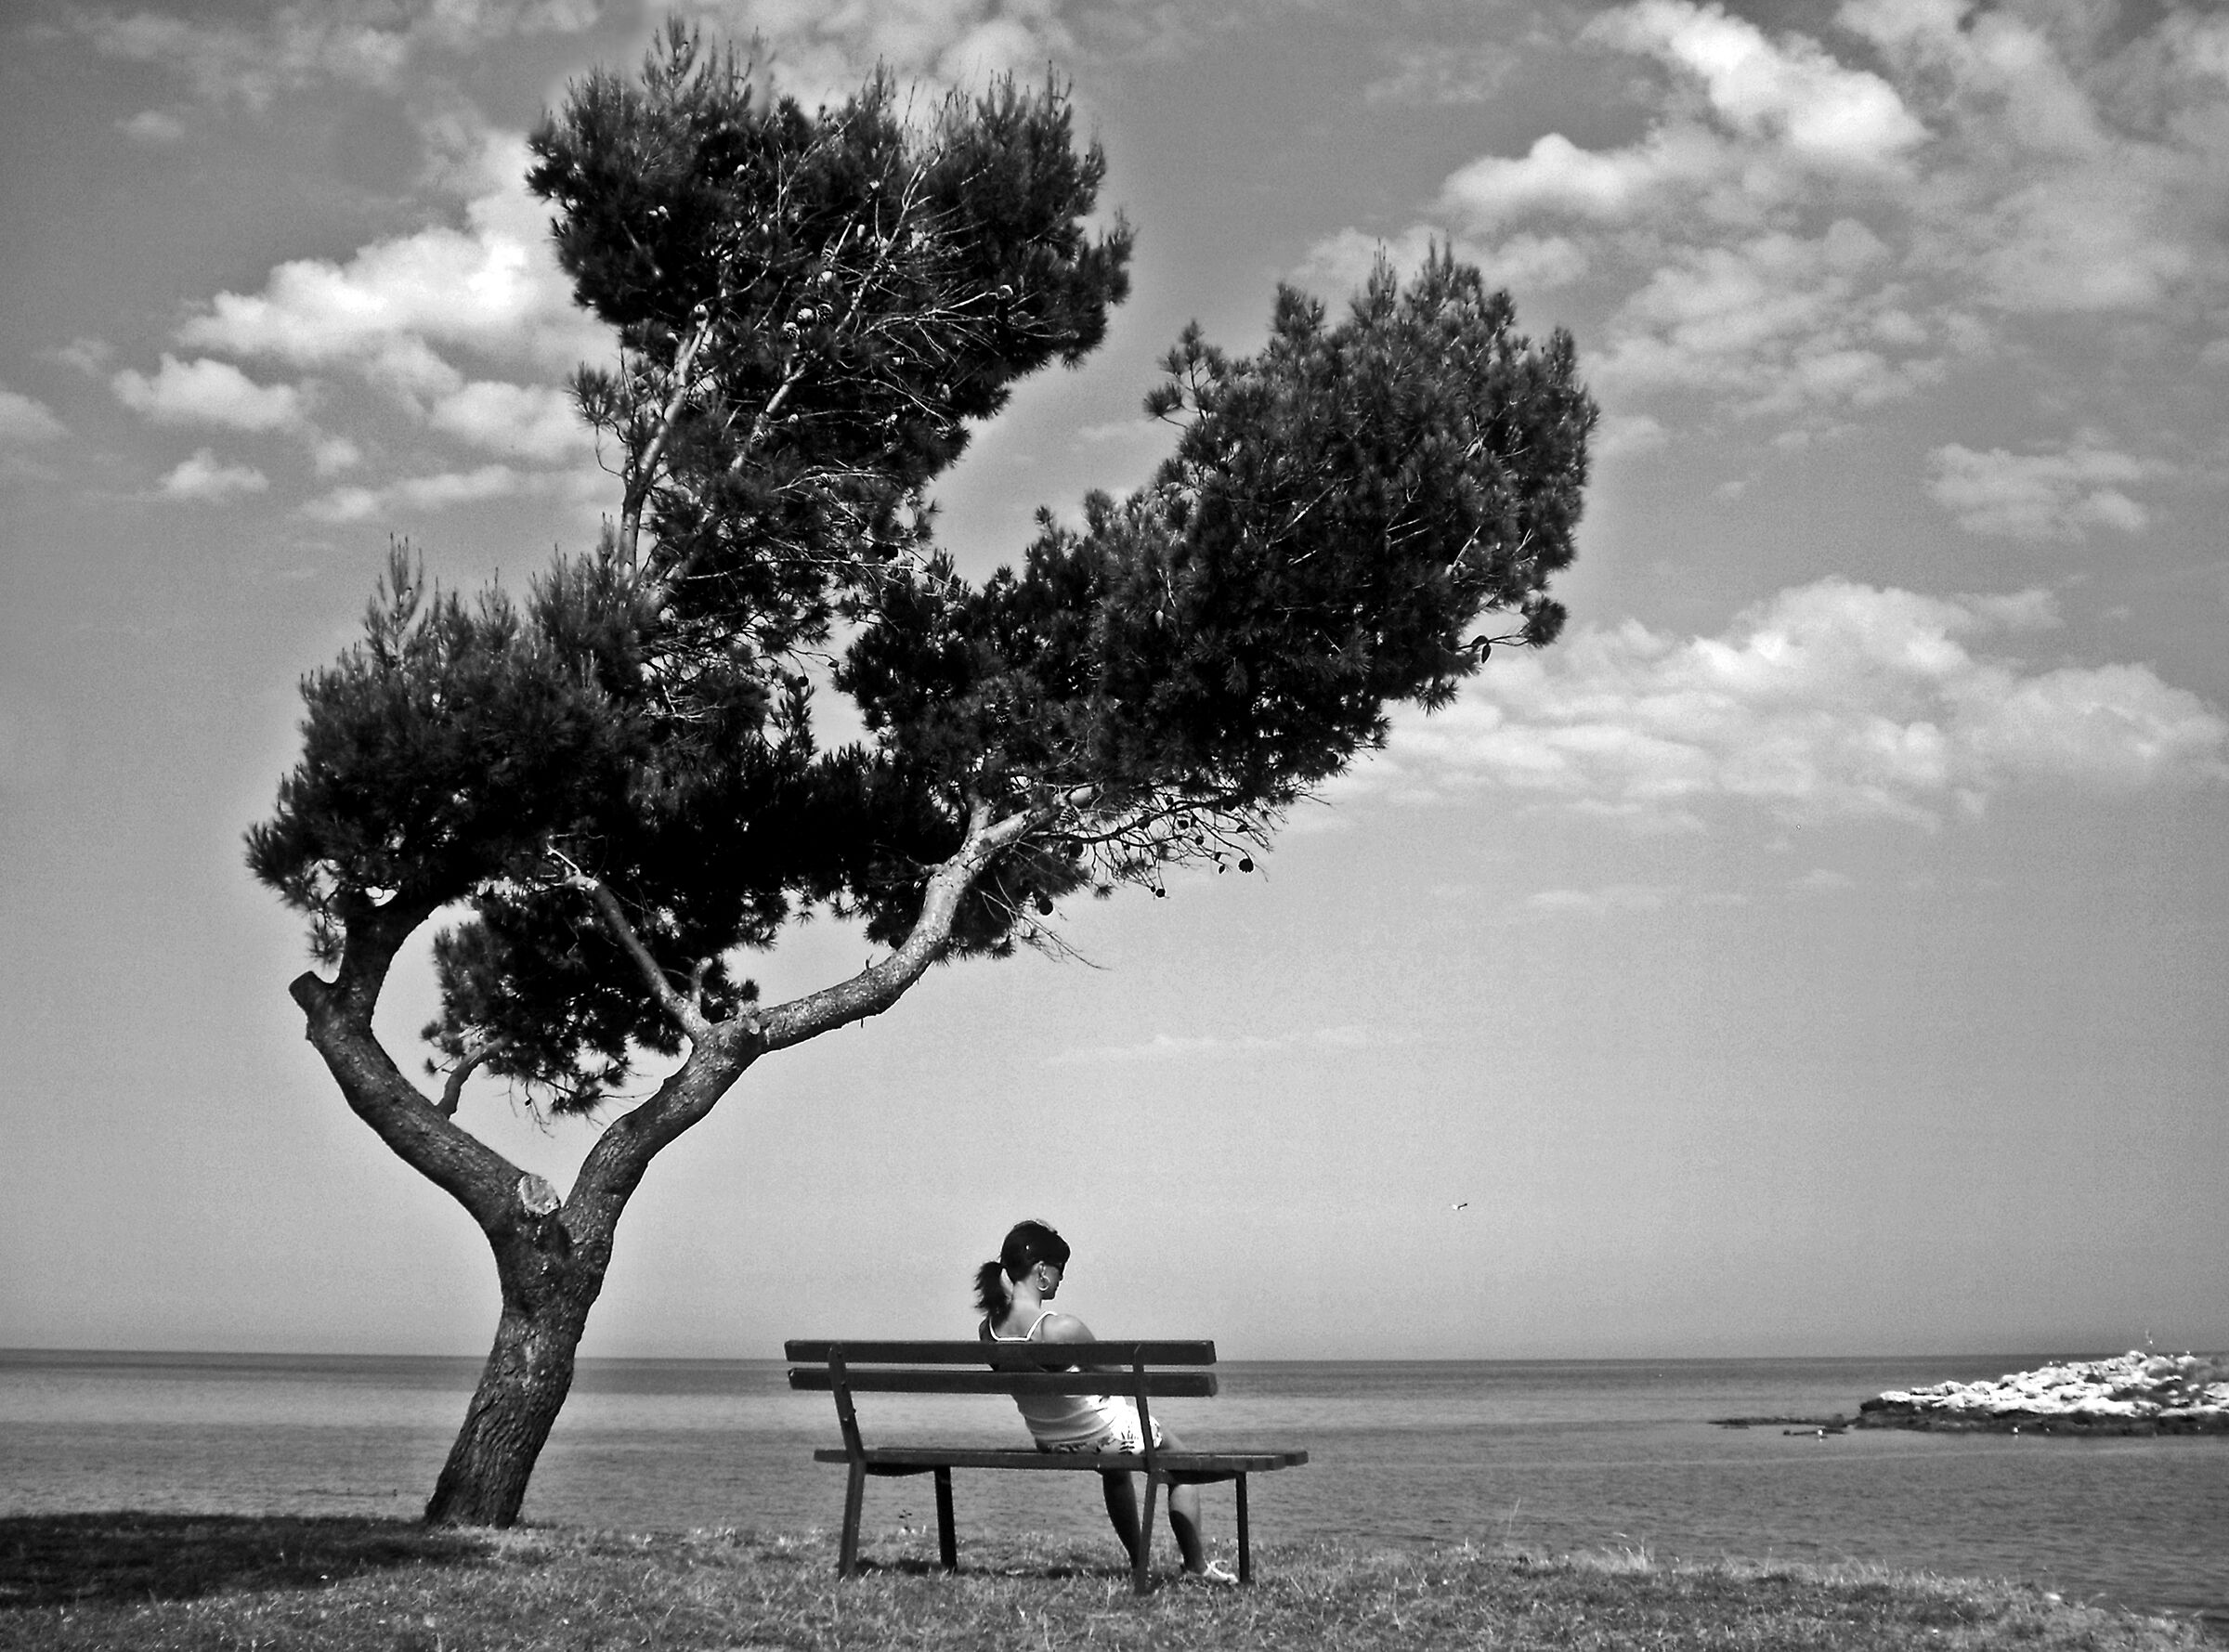 A bench by the sea......